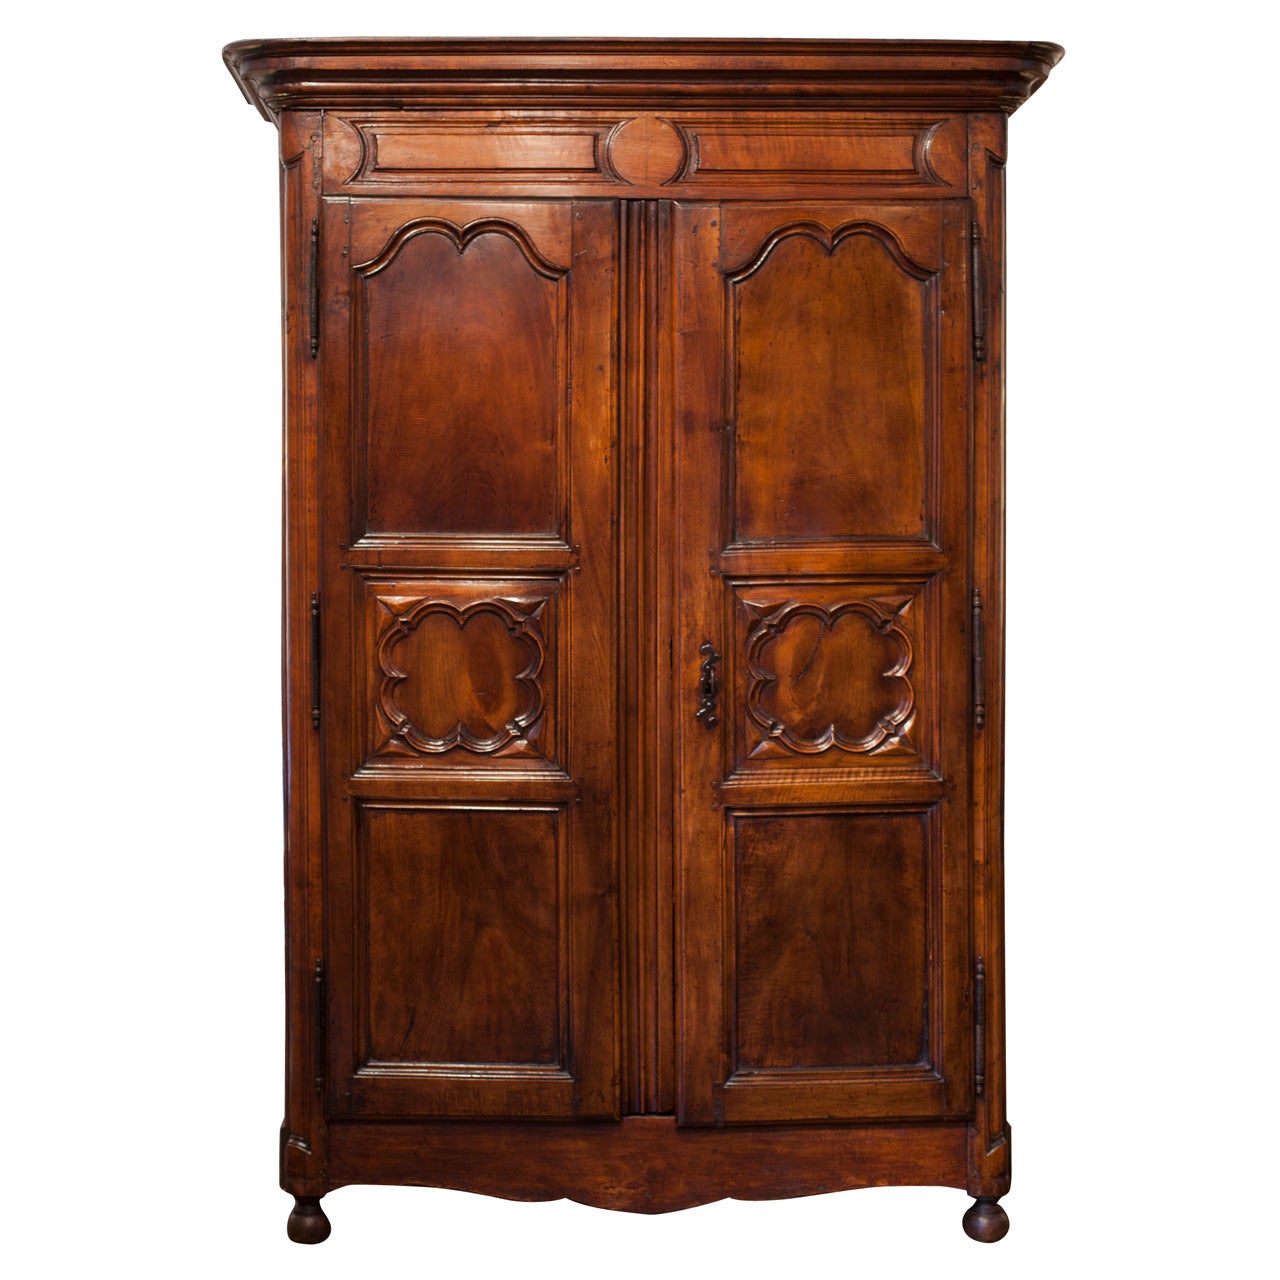 Early 18th Century French Hand-Carved Walnut Armoire from Lyon